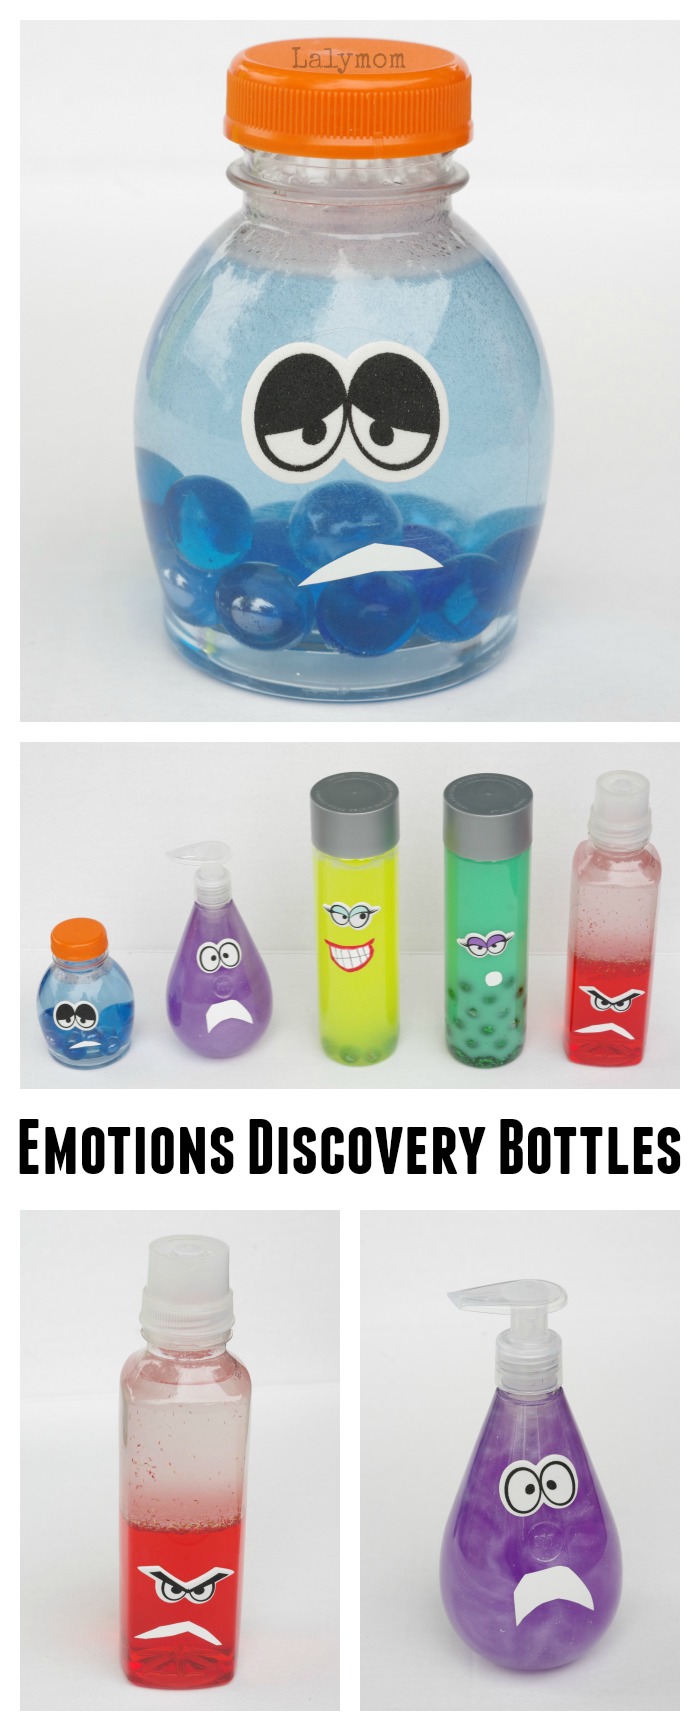 How to Make Emotions Discovery Bottles - Inspired by Disney Pixar's Inside Out